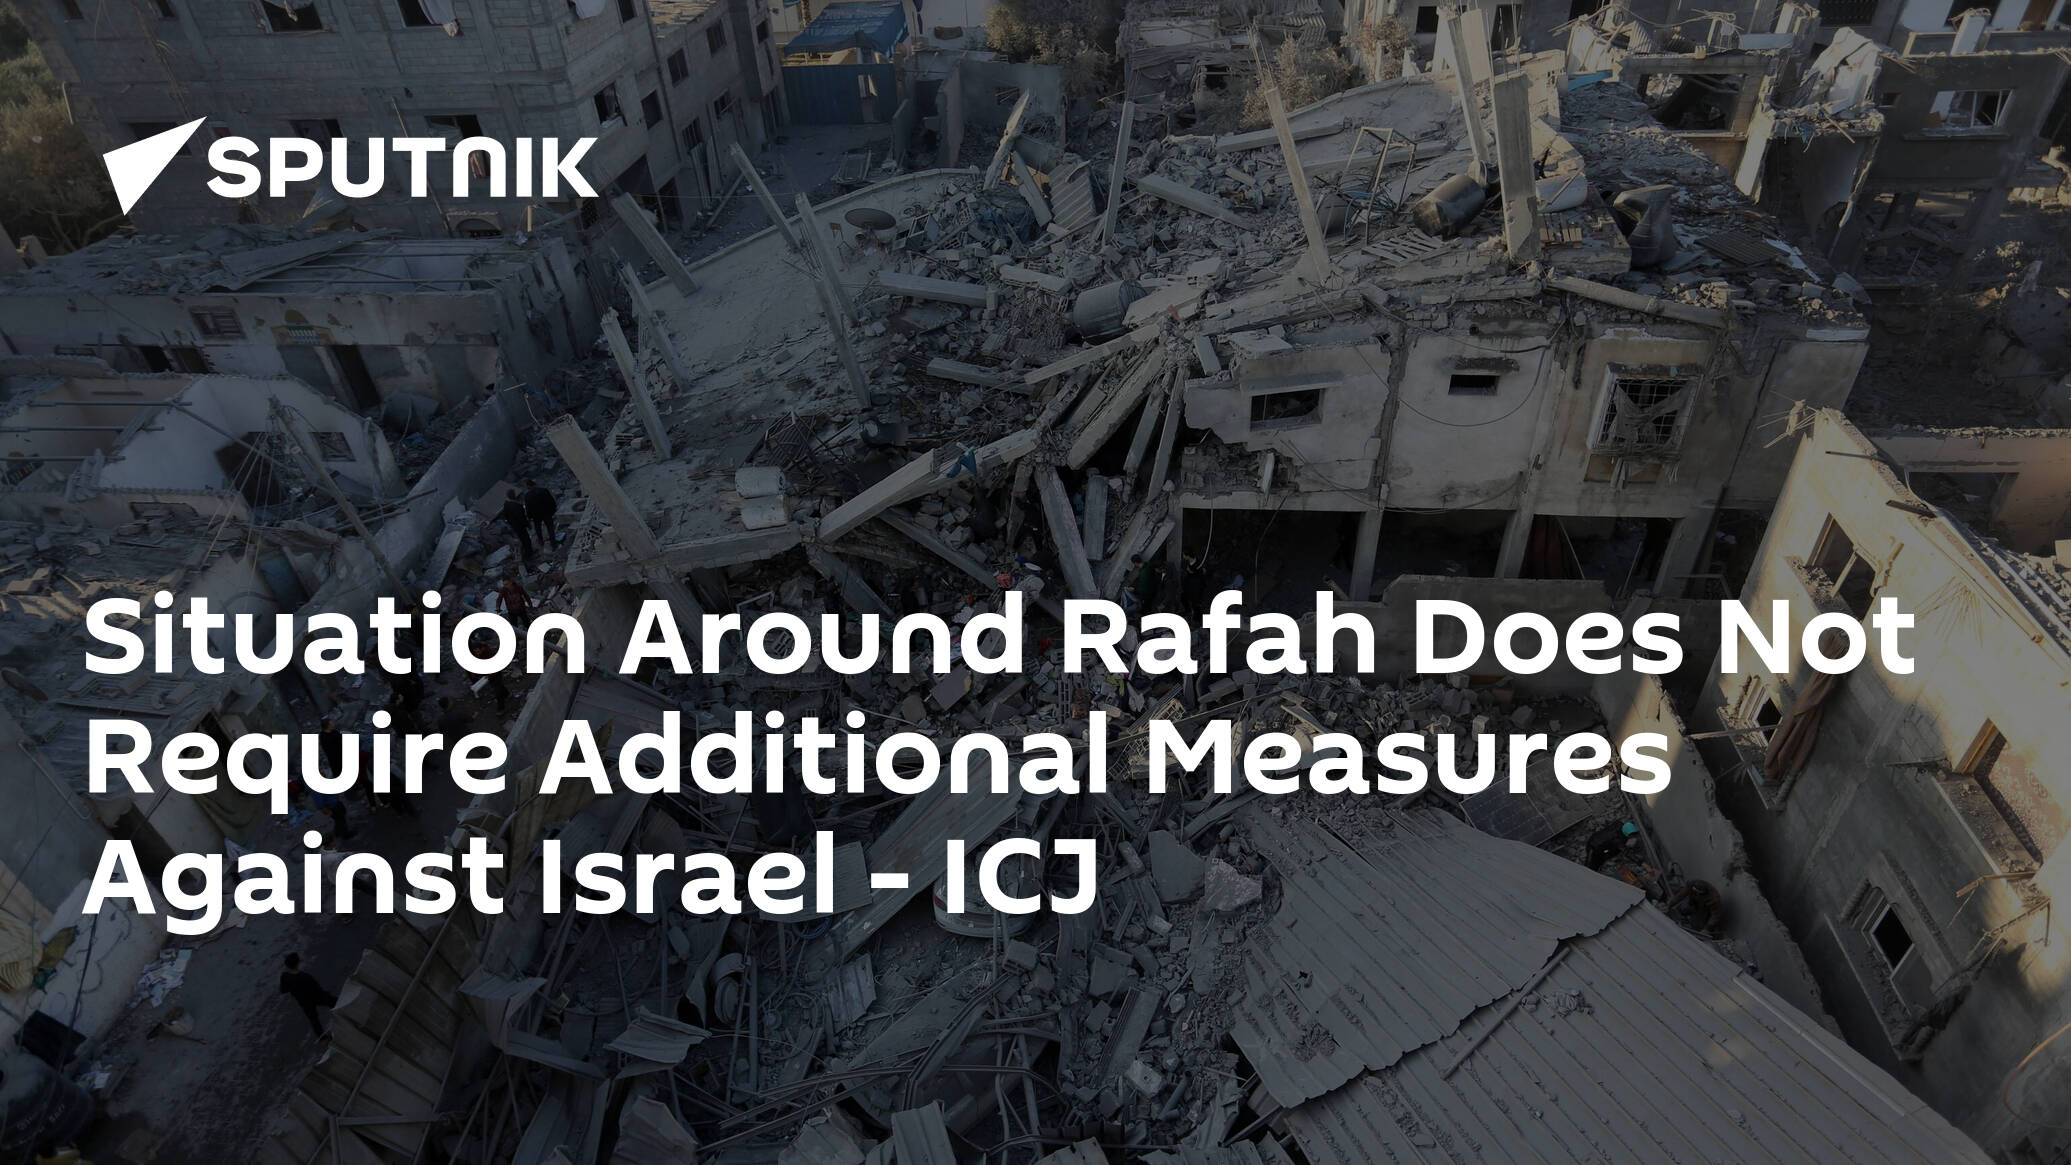 Situation Around Rafah Does Not Require Additional Measures Against Israel – ICJ